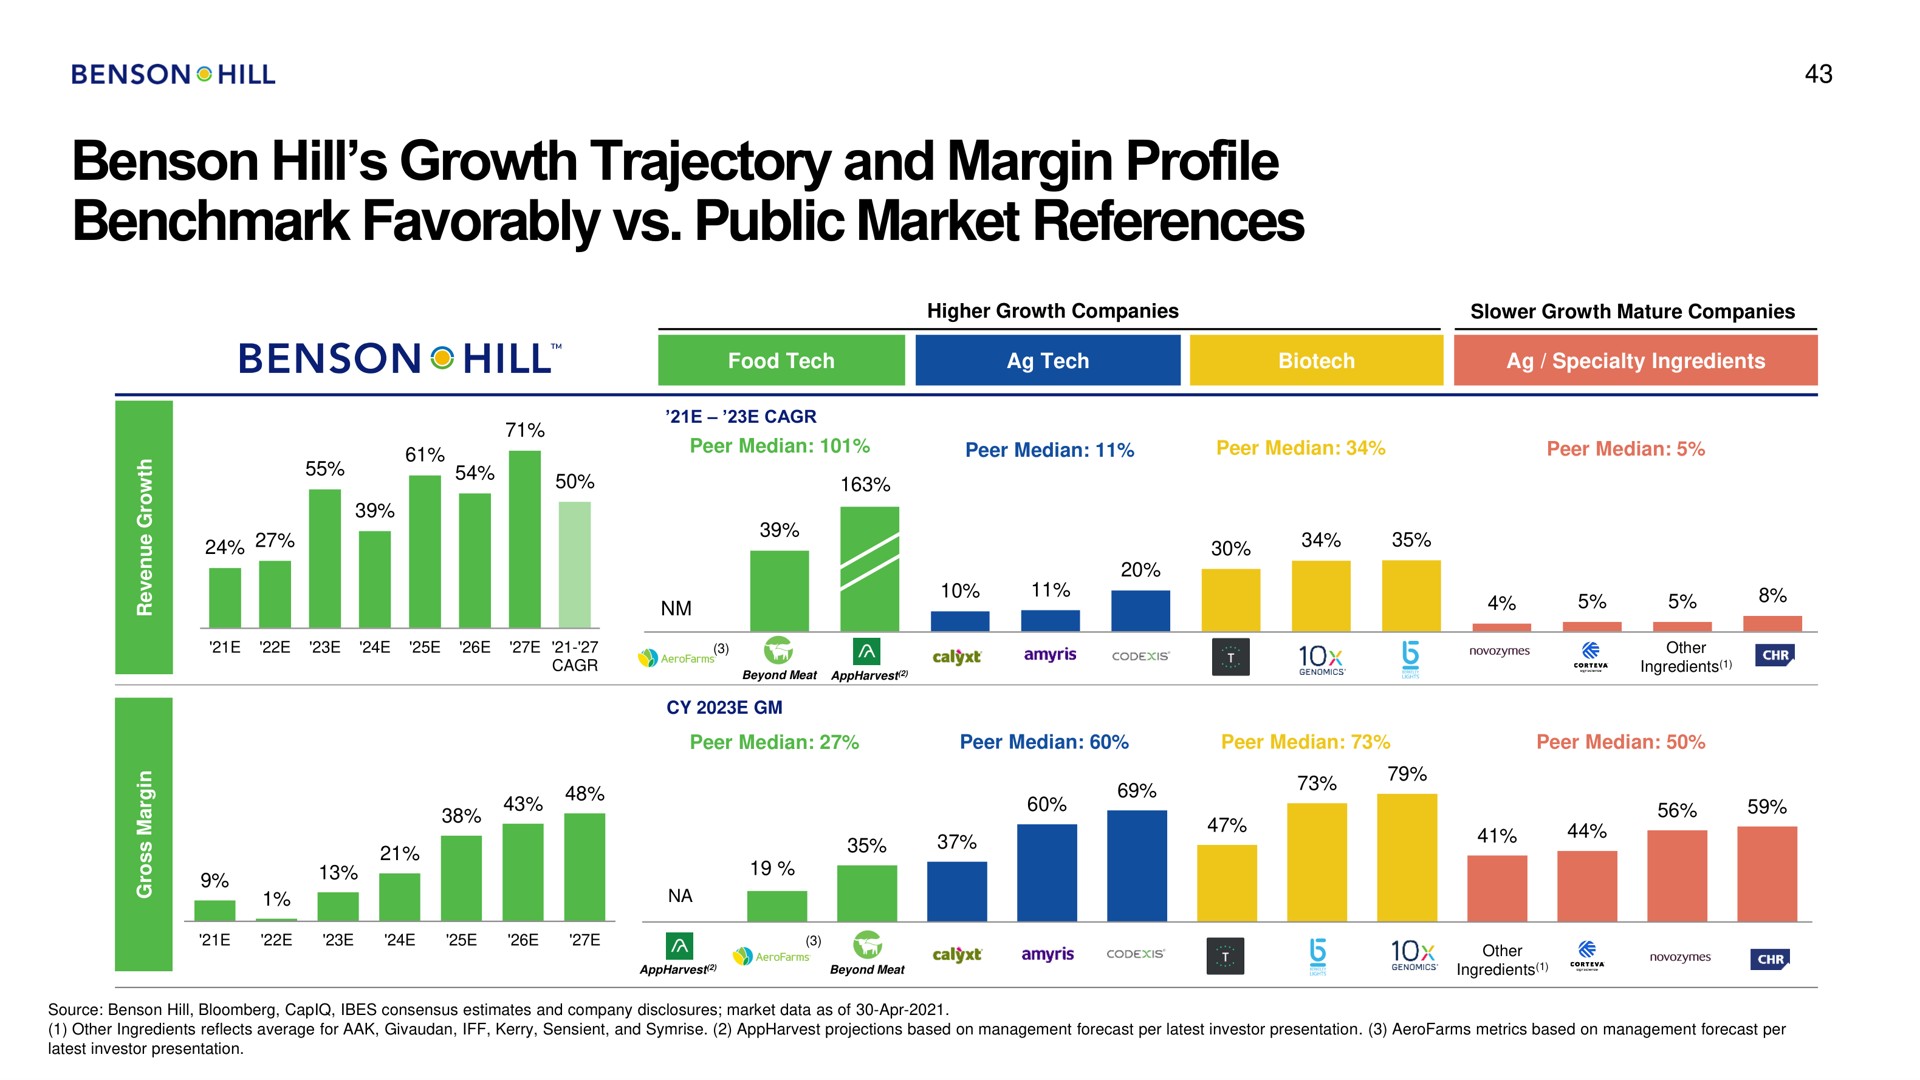 hill growth trajectory and margin profile favorably public market references i | Benson Hill